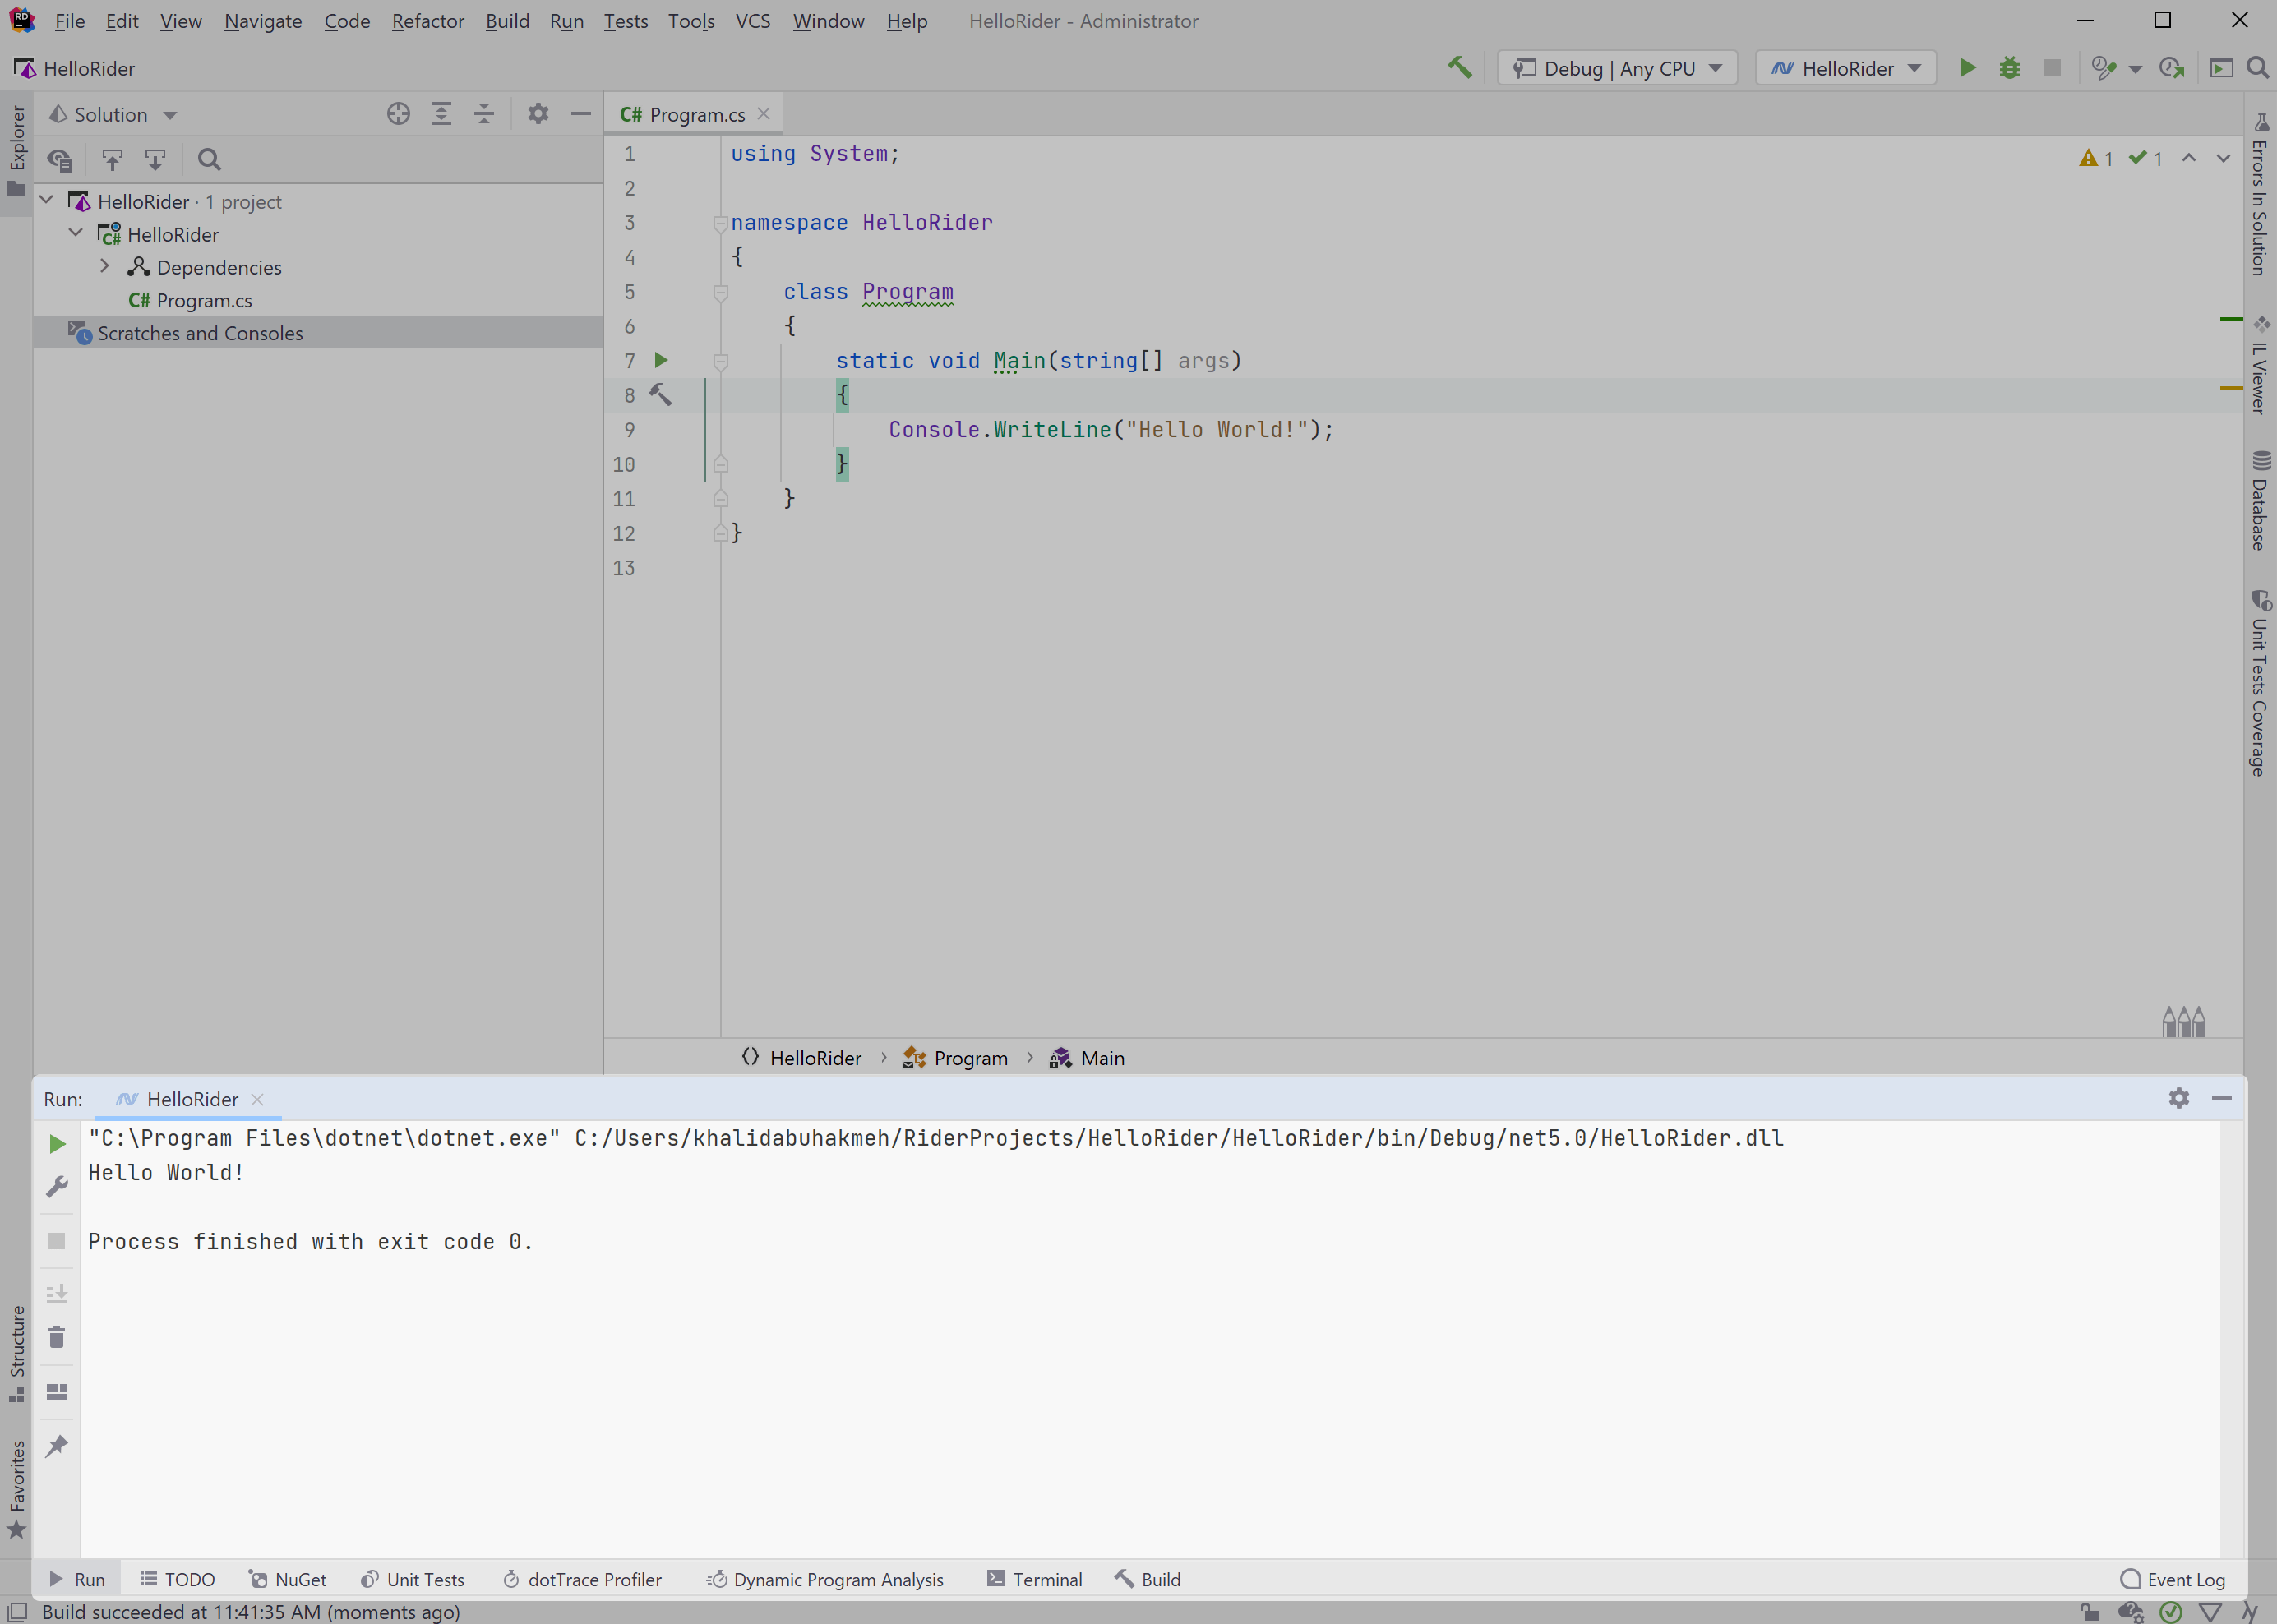 Running a solution within JetBrains Rider using play button